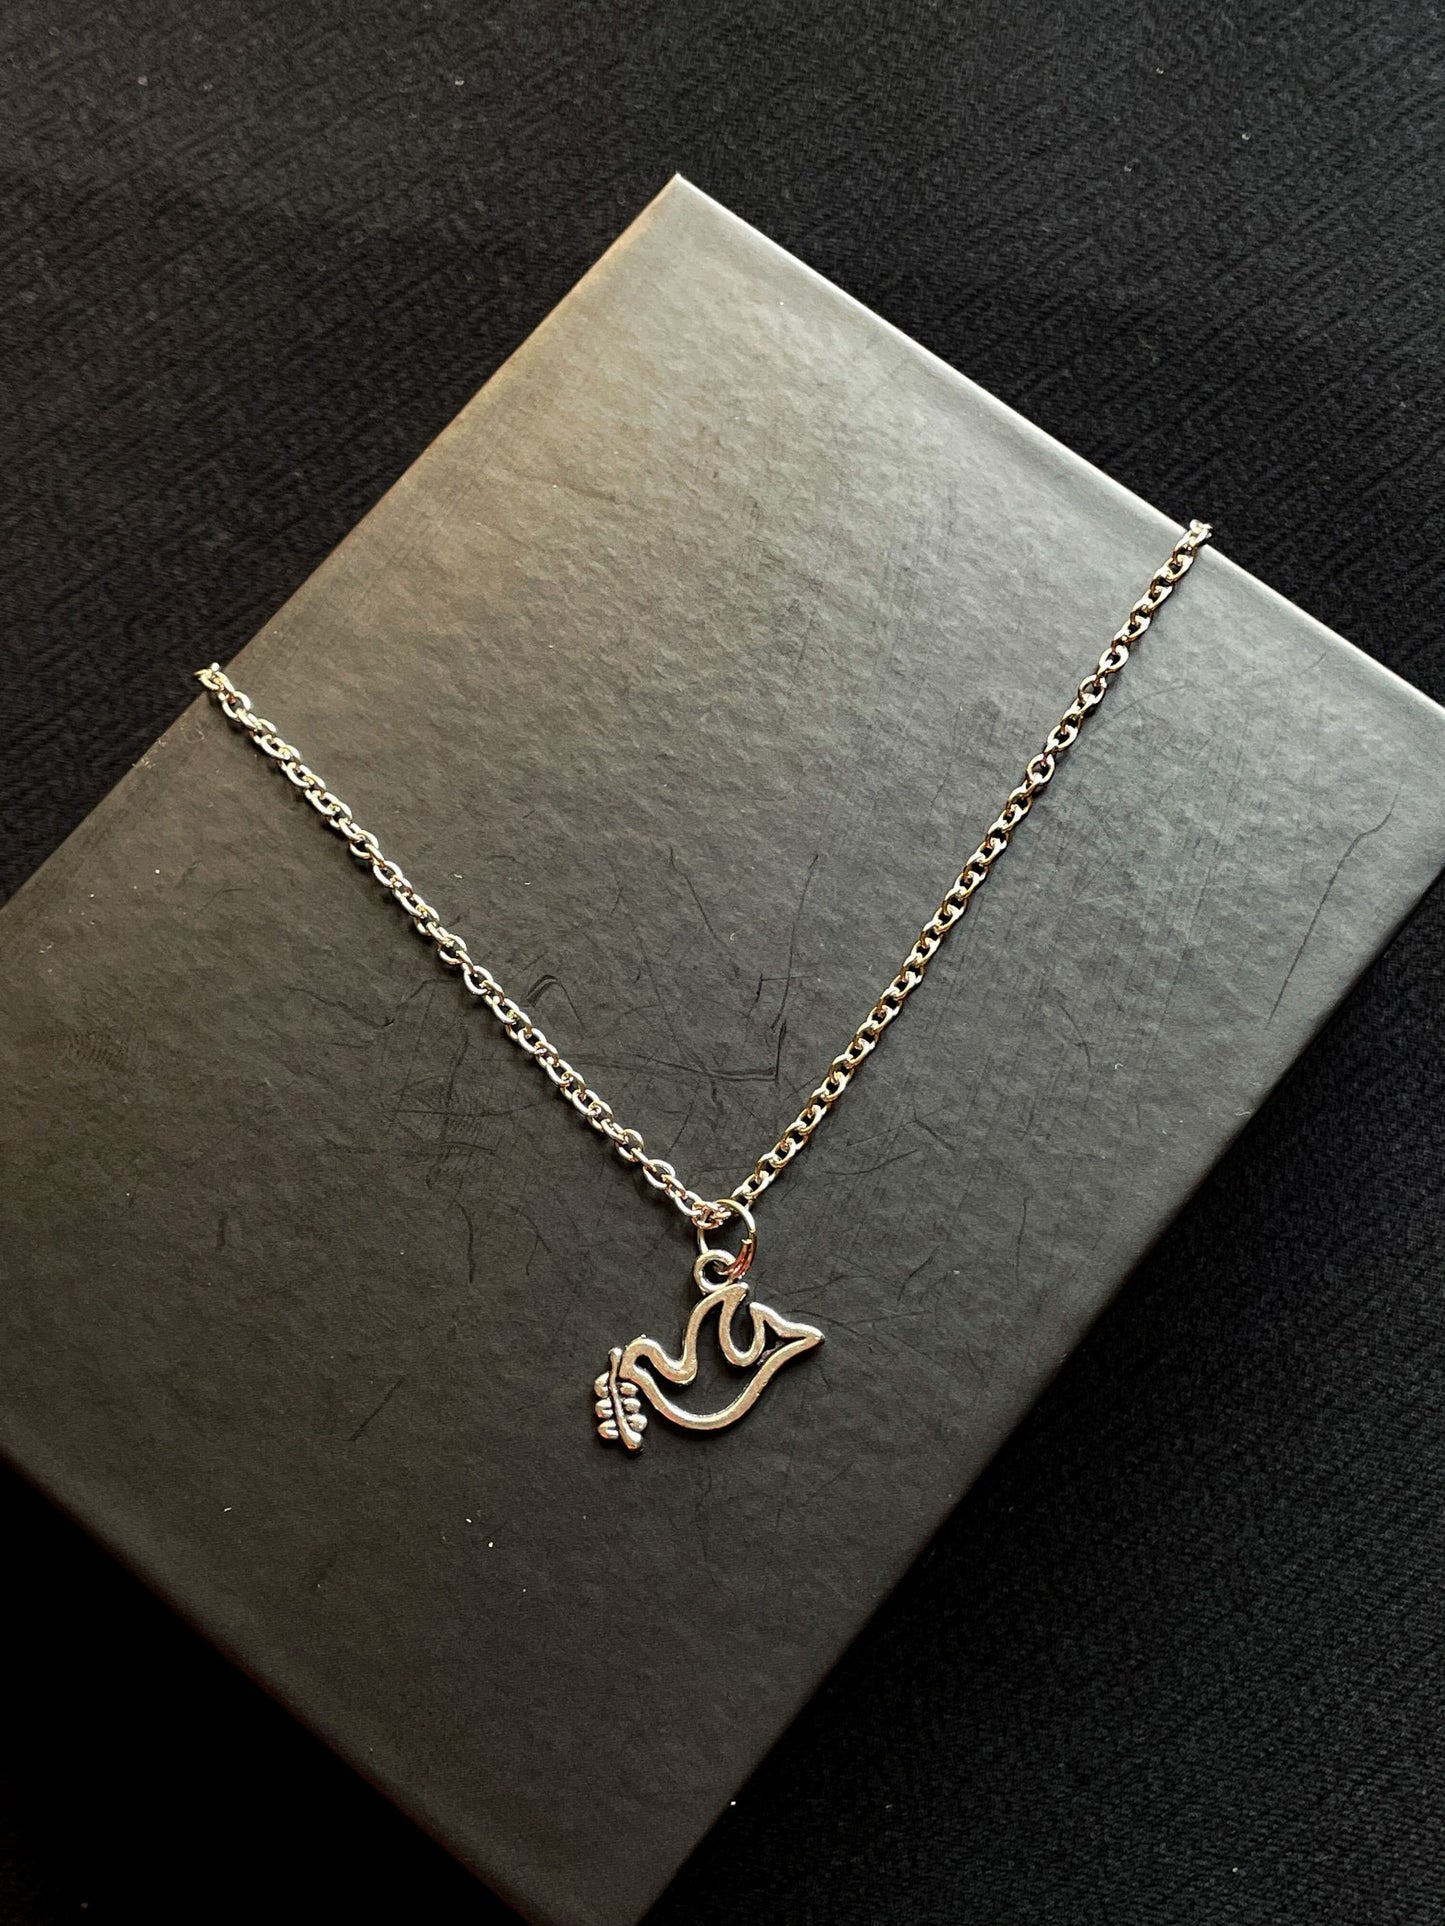 Dove Holding Olive Branch Silver Pendant With Chain